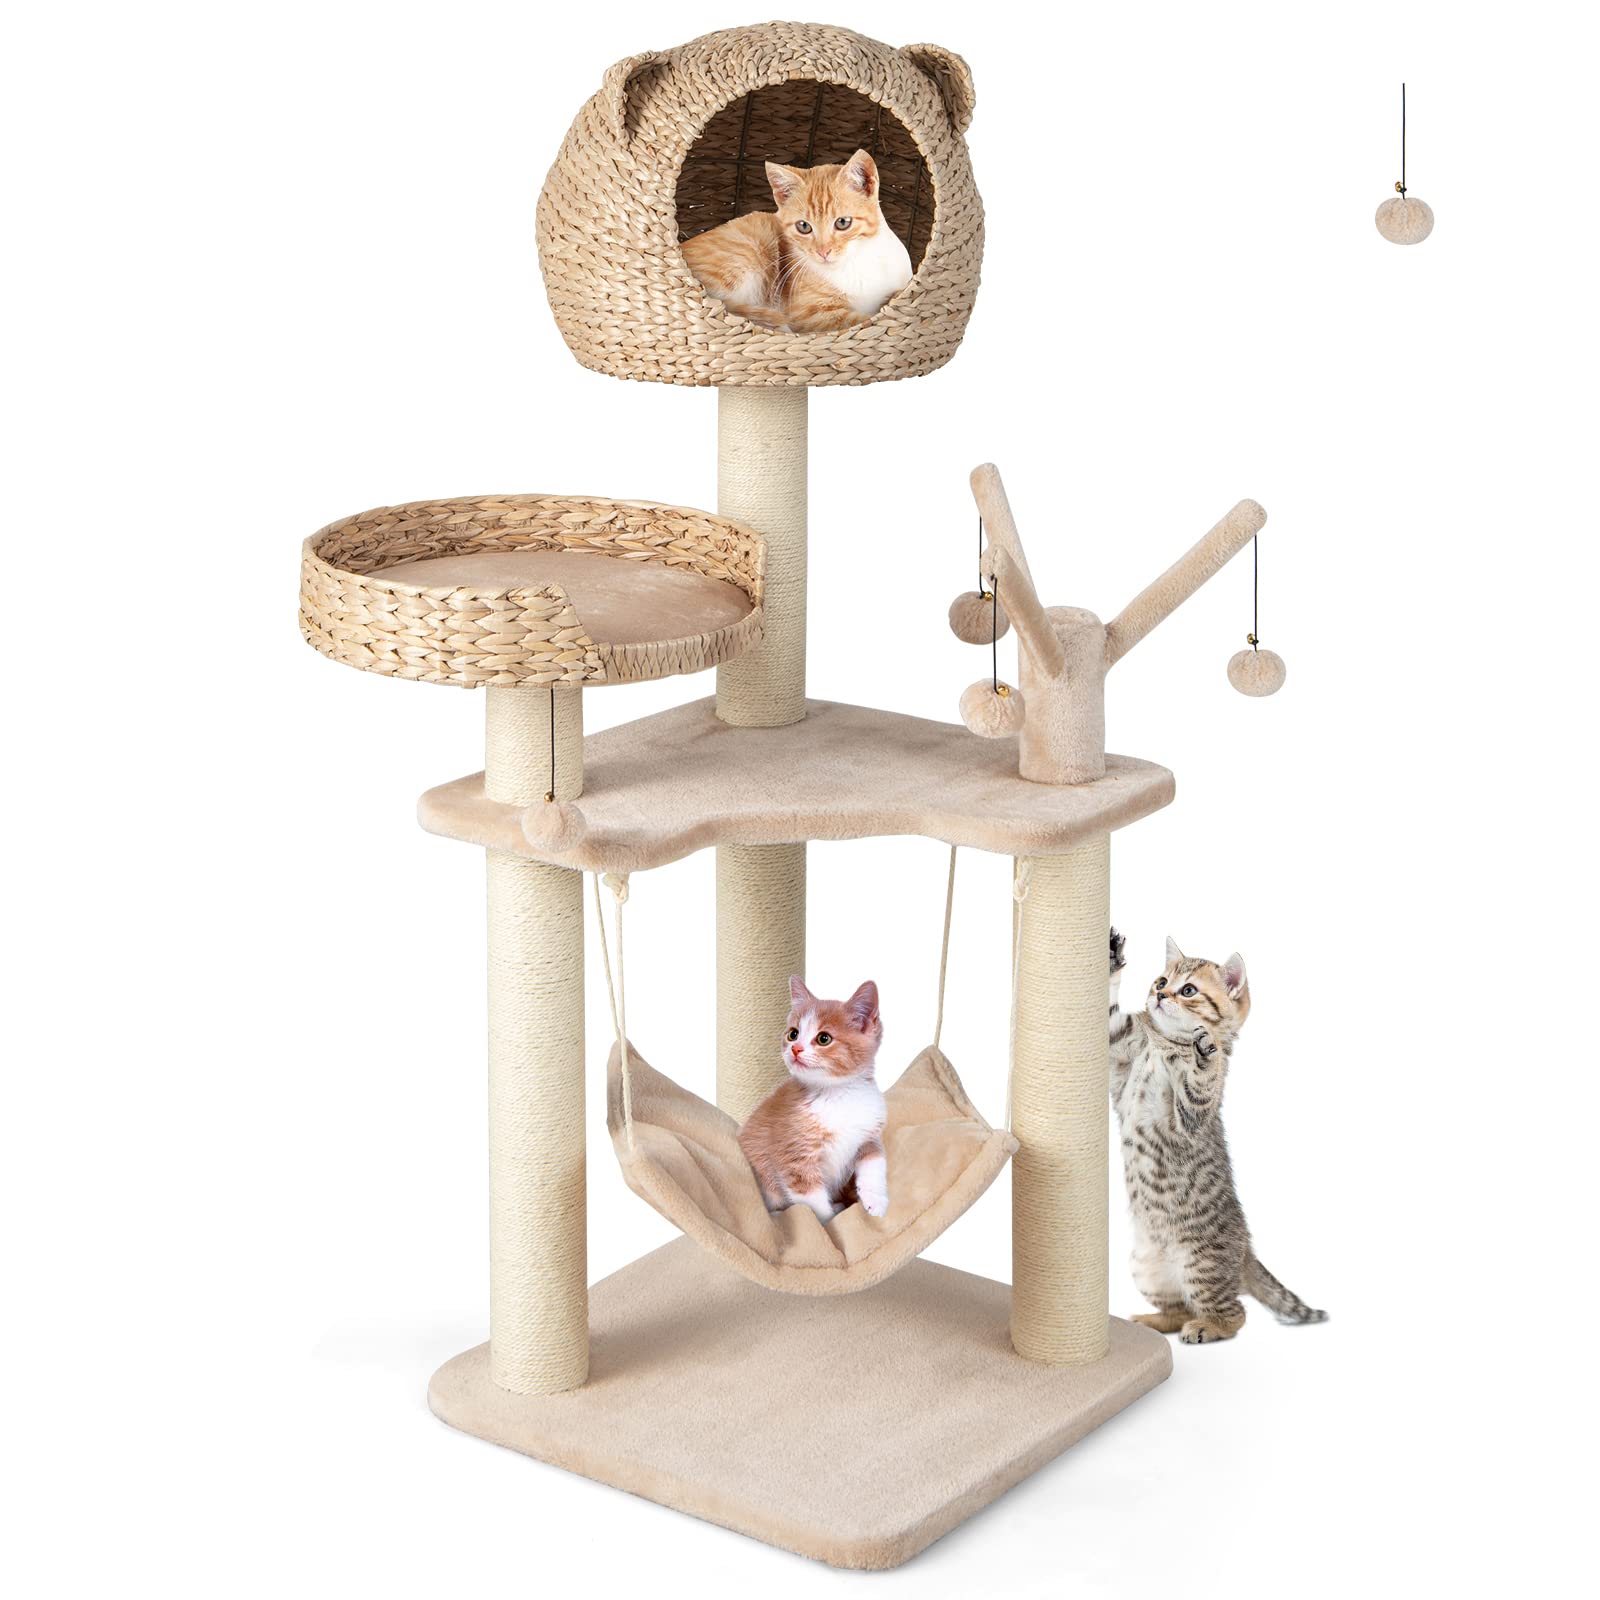 Giantex Wooden Cat Tree, 48 inches Cat Tower with Cattail Condo, Cat Bed, Hammock, Rotatable Jingling Balls